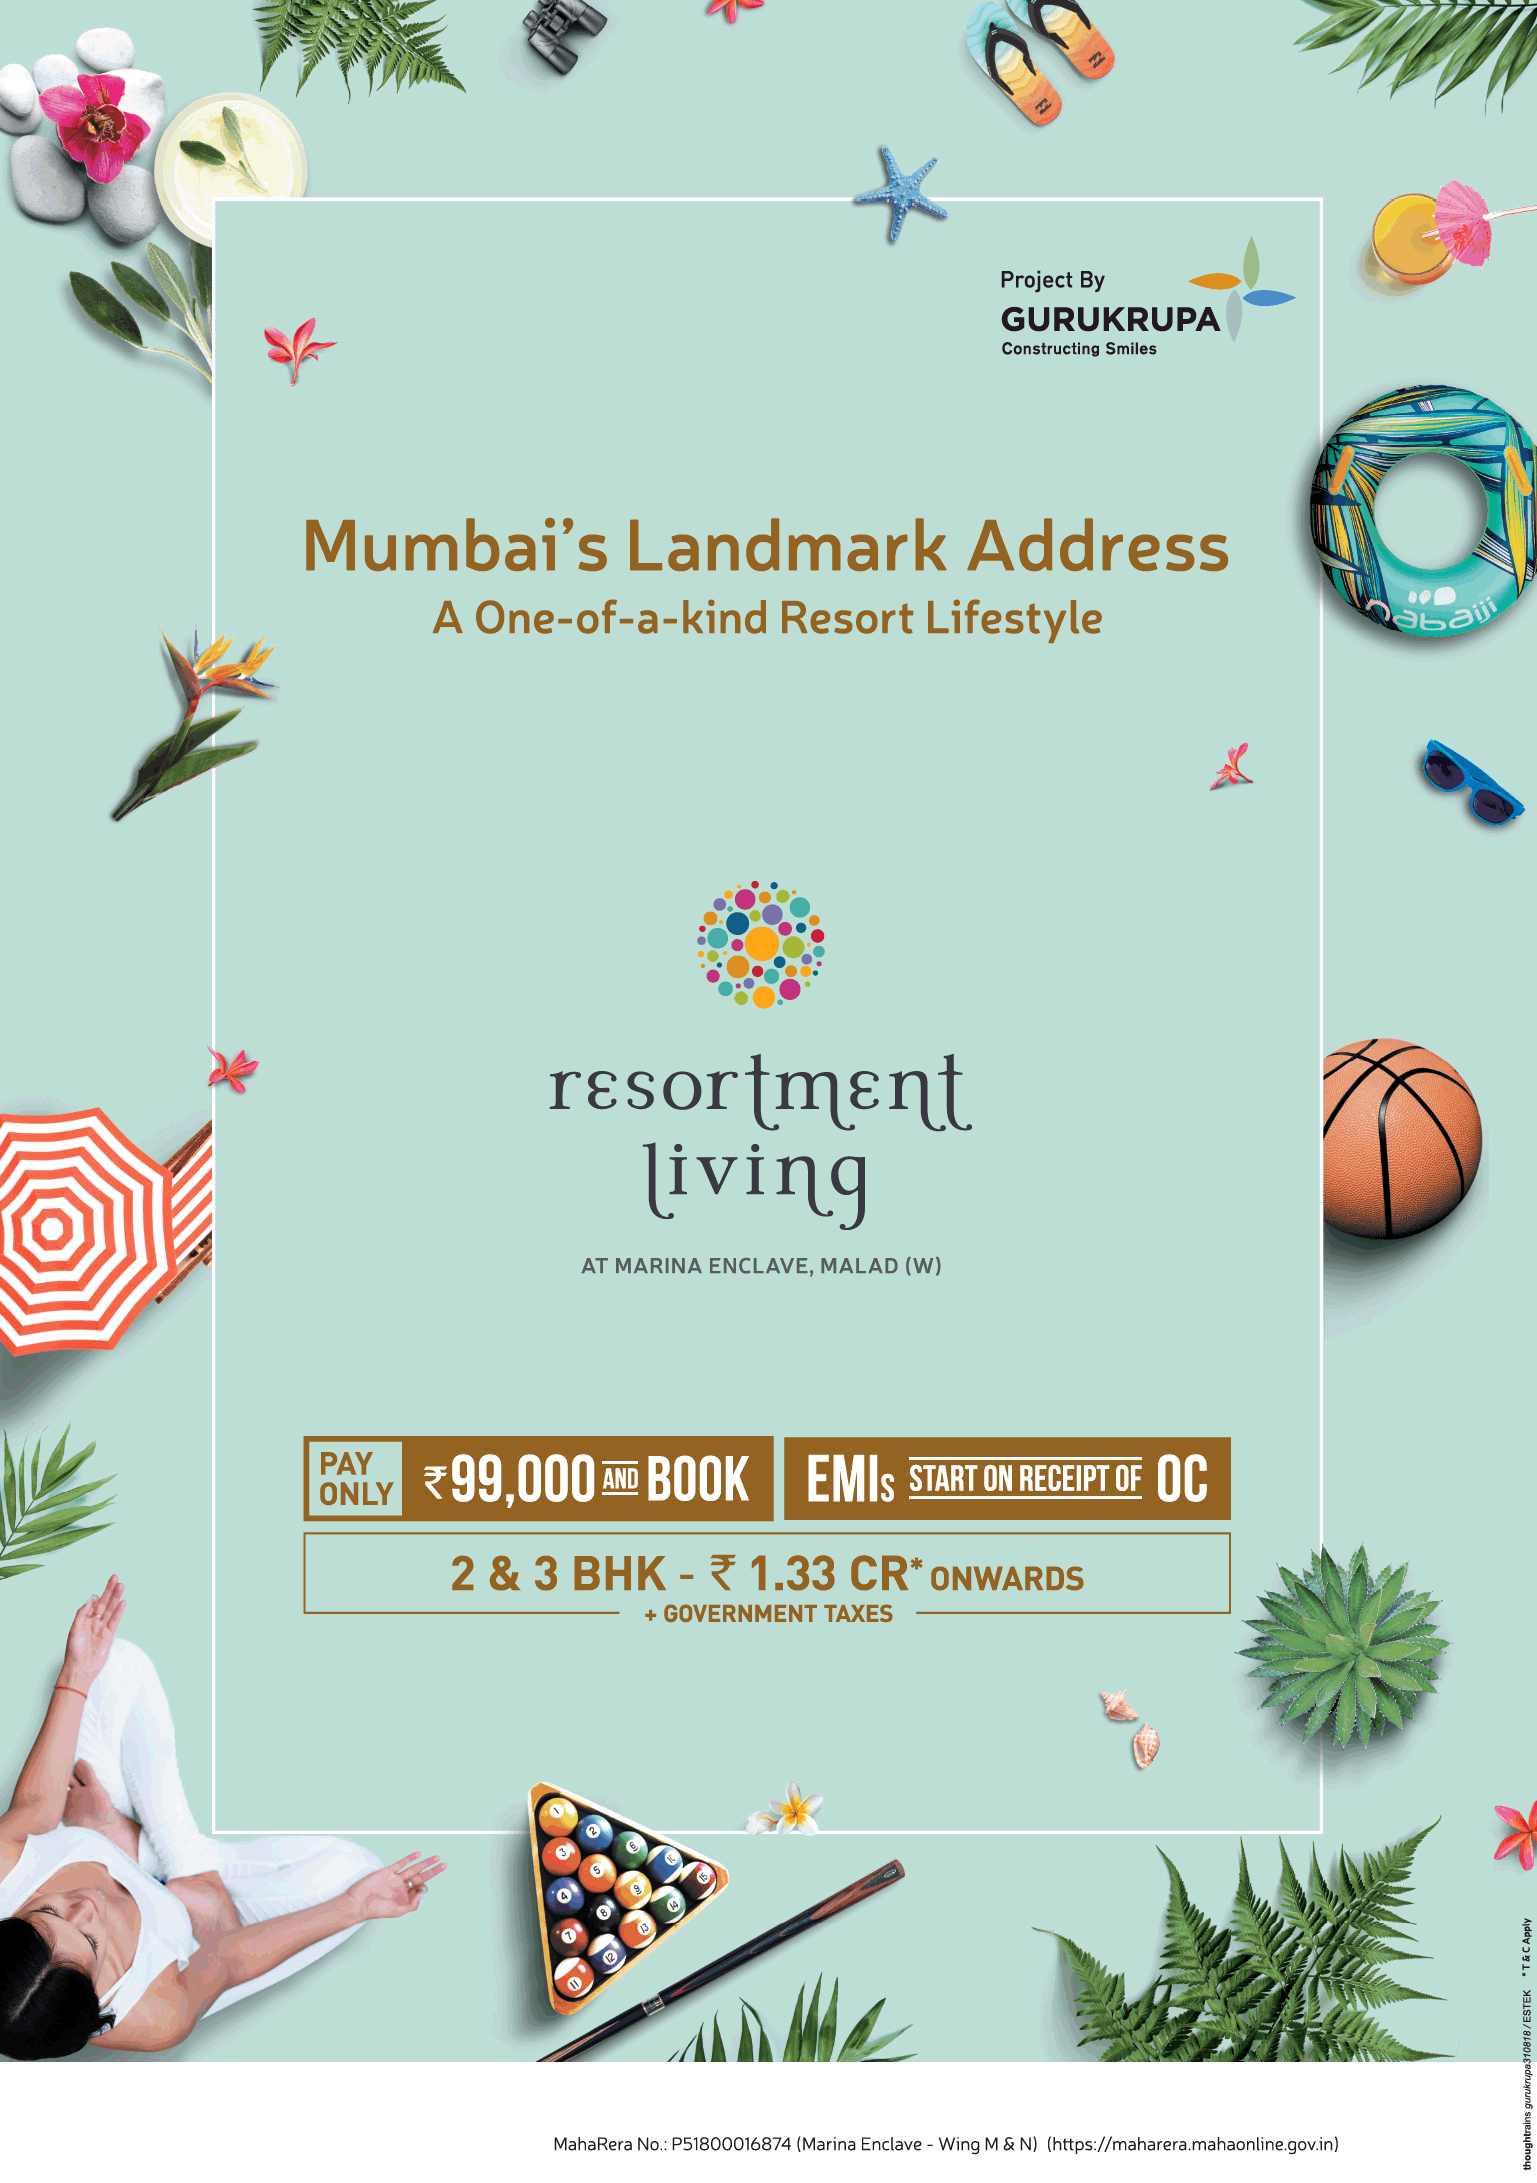 Pay only Rs. 99000 and book your home at Gurukrupa Resortment Living in Mumbai